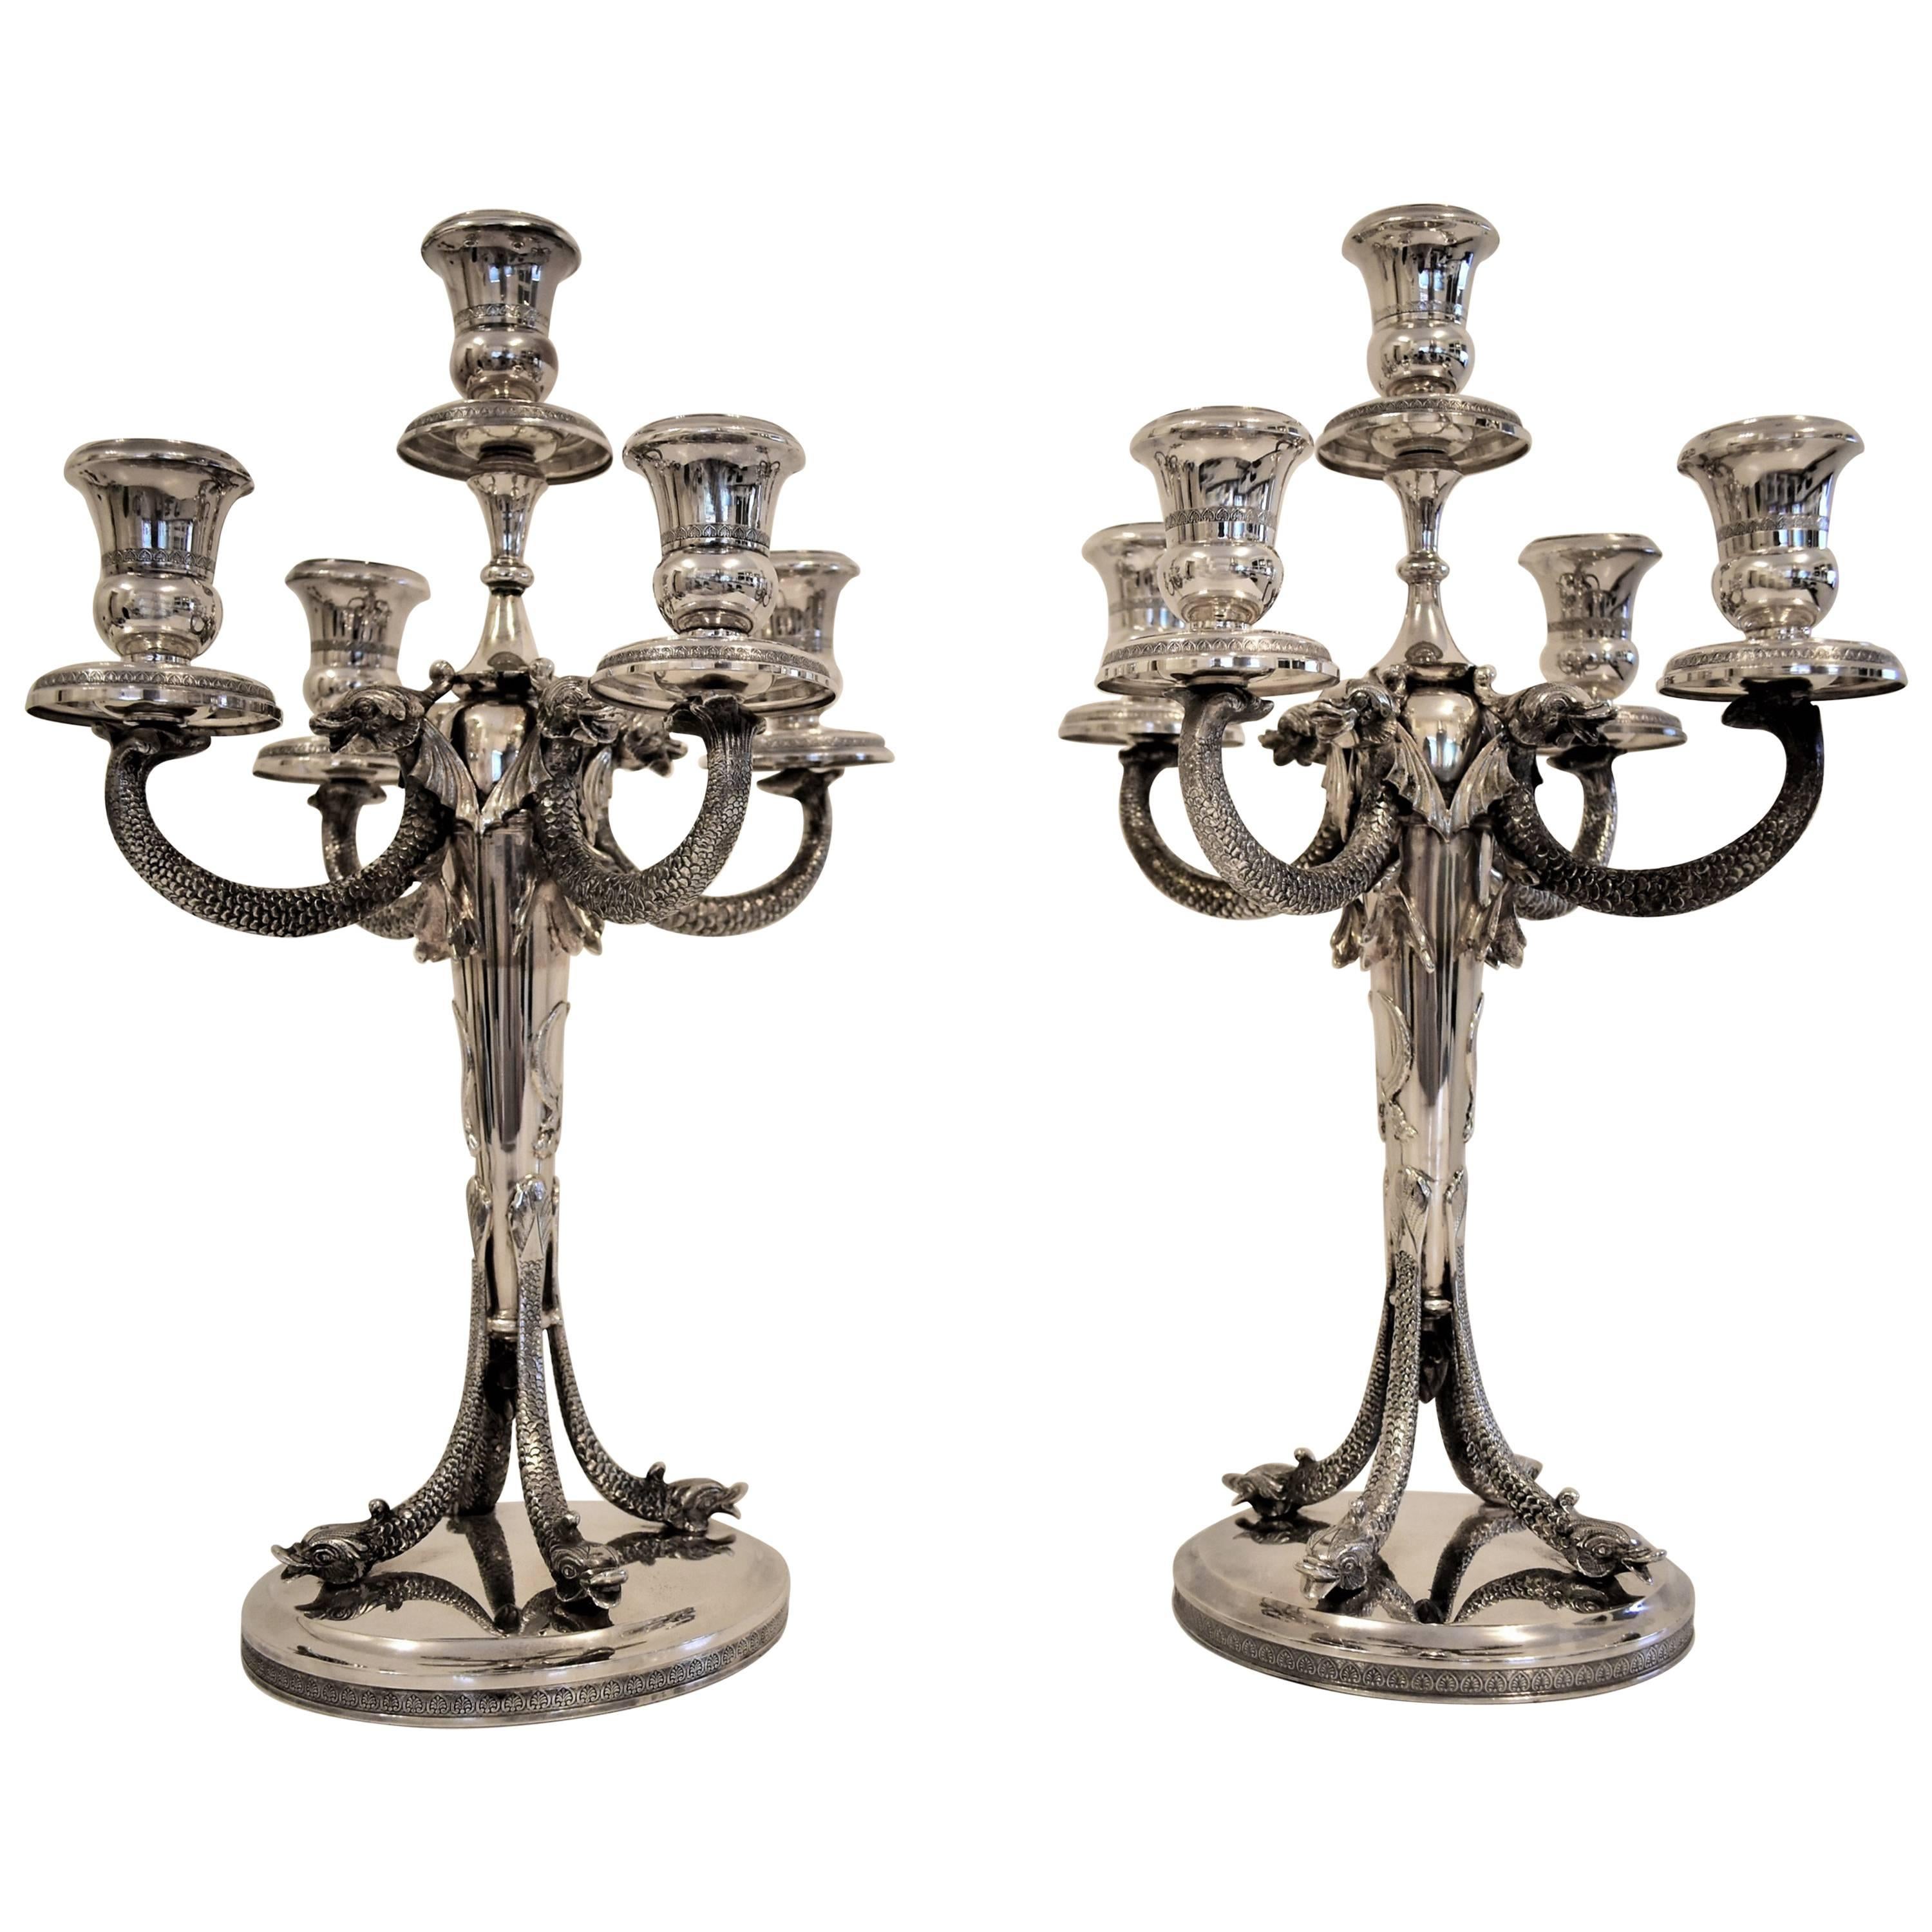 20th Century Silver Five Branch Candlesticks Engraved with Fish Details For Sale